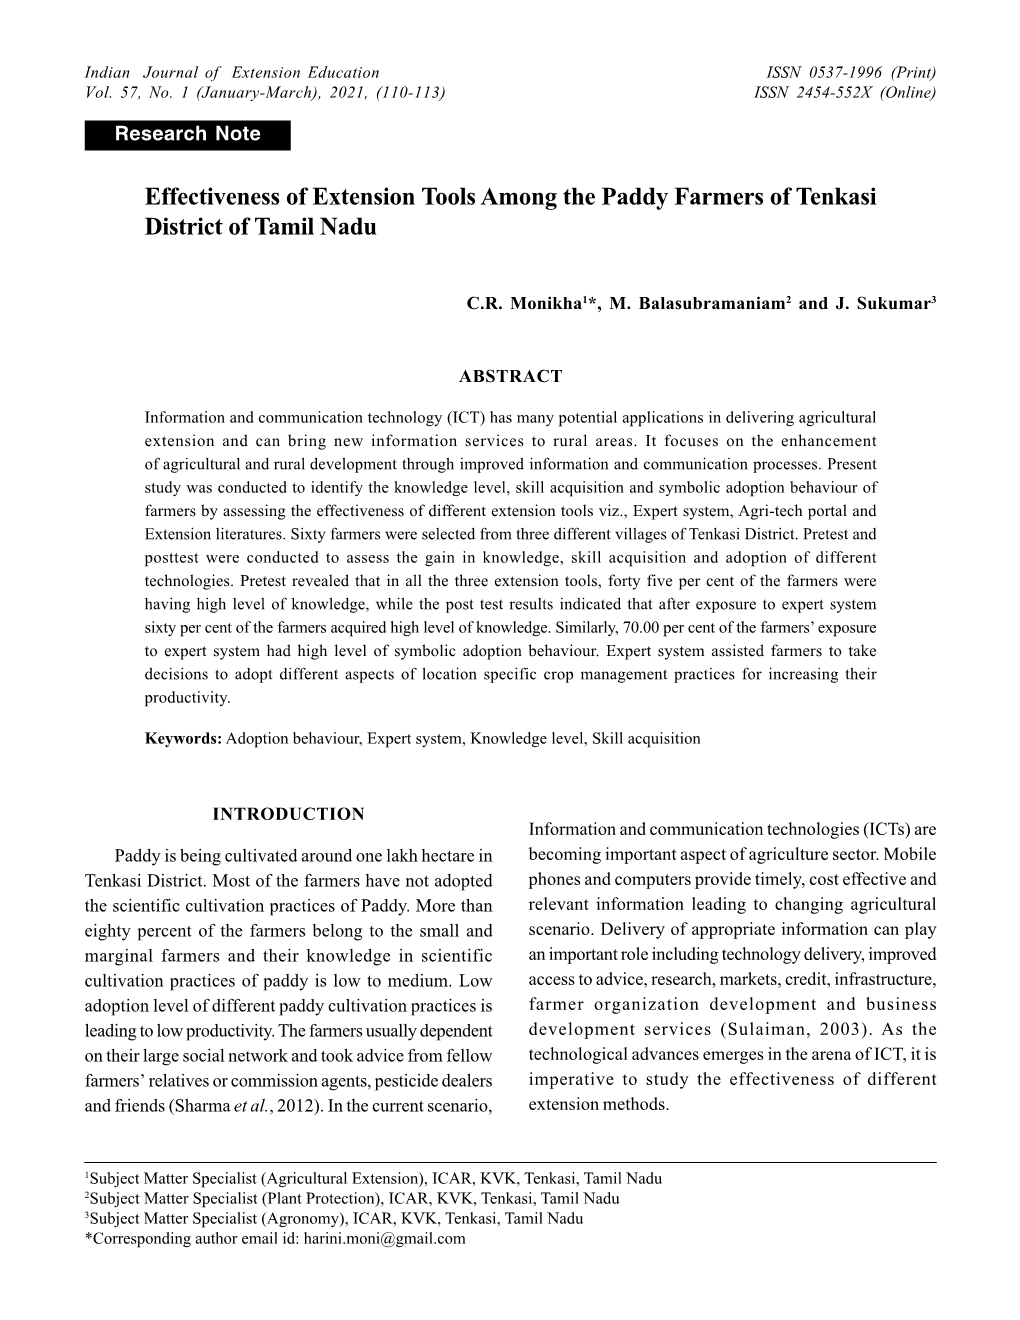 Effectiveness of Extension Tools Among the Paddy Farmers of Tenkasi District of Tamil Nadu